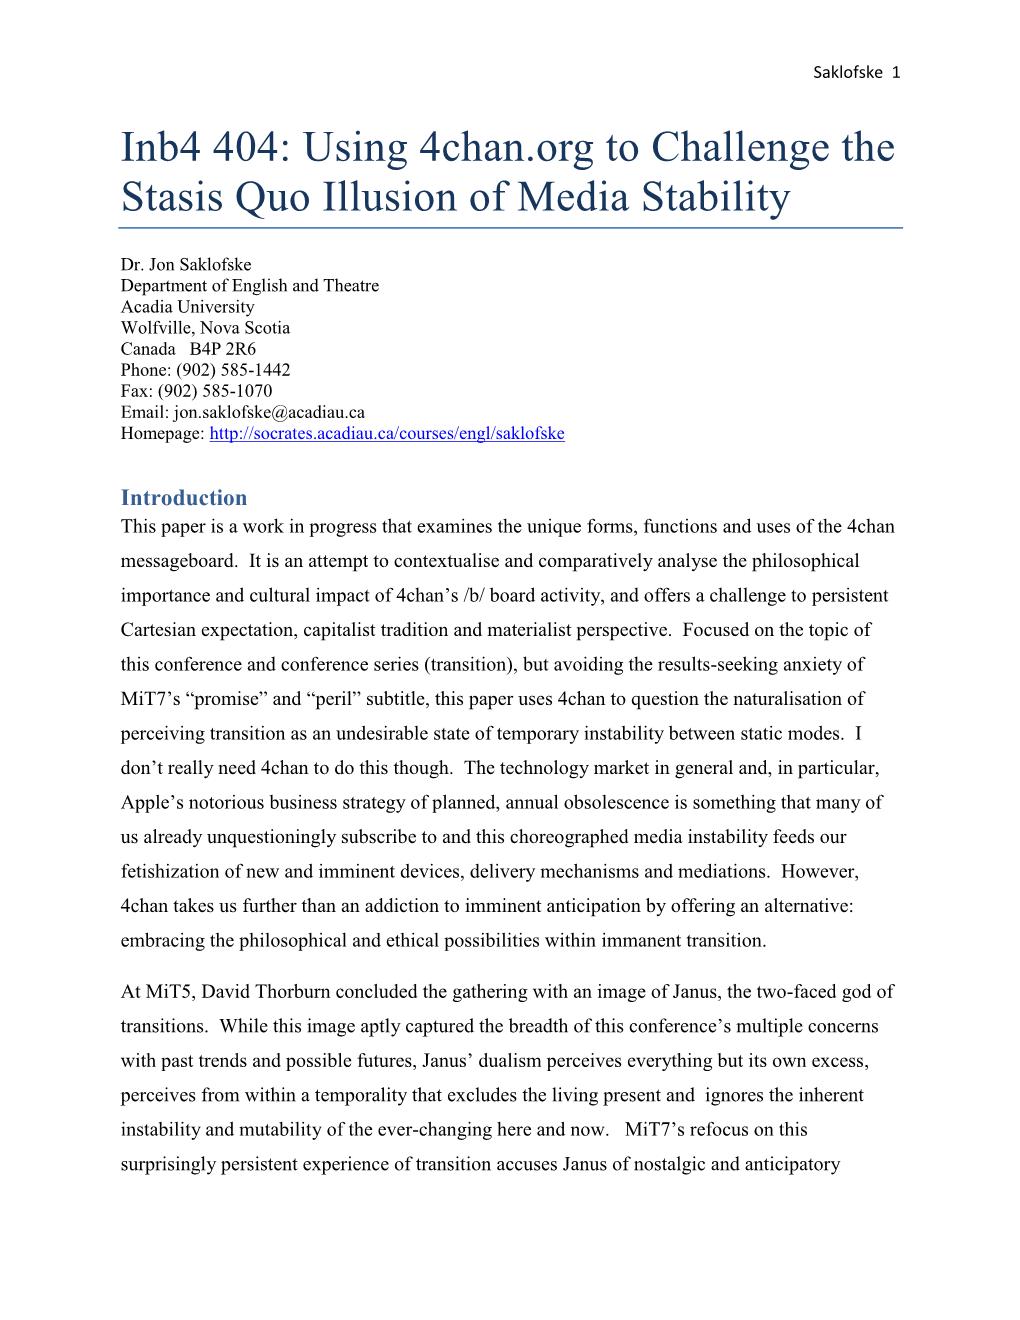 Using 4Chan.Org to Challenge the Stasis Quo Illusion of Media Stability